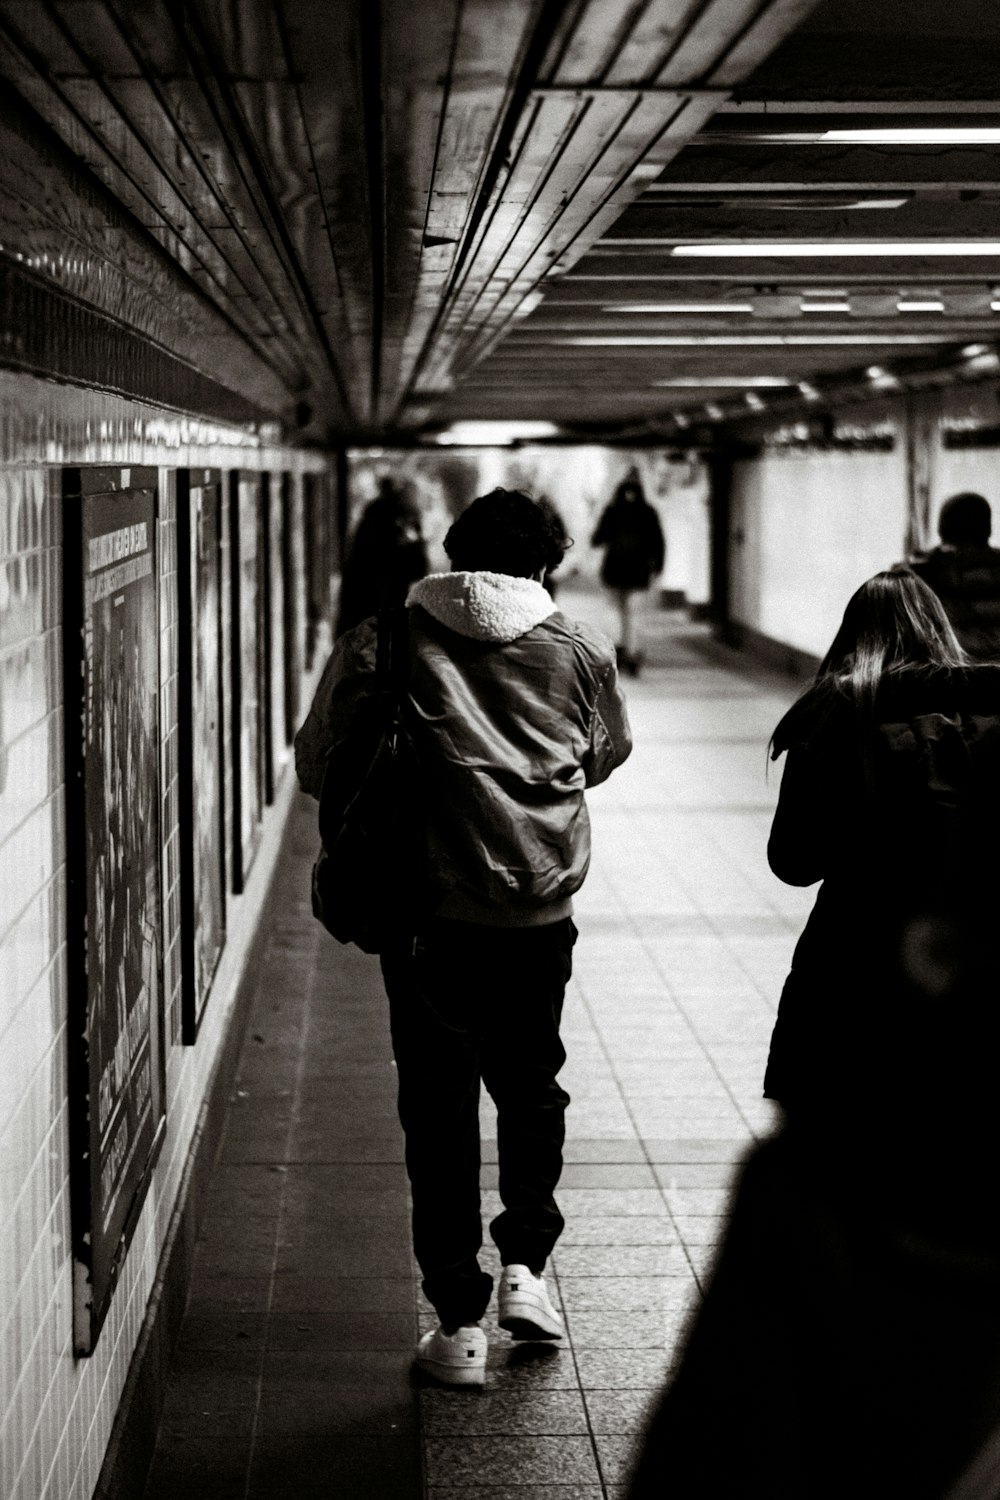 a black and white photo of people walking in a subway